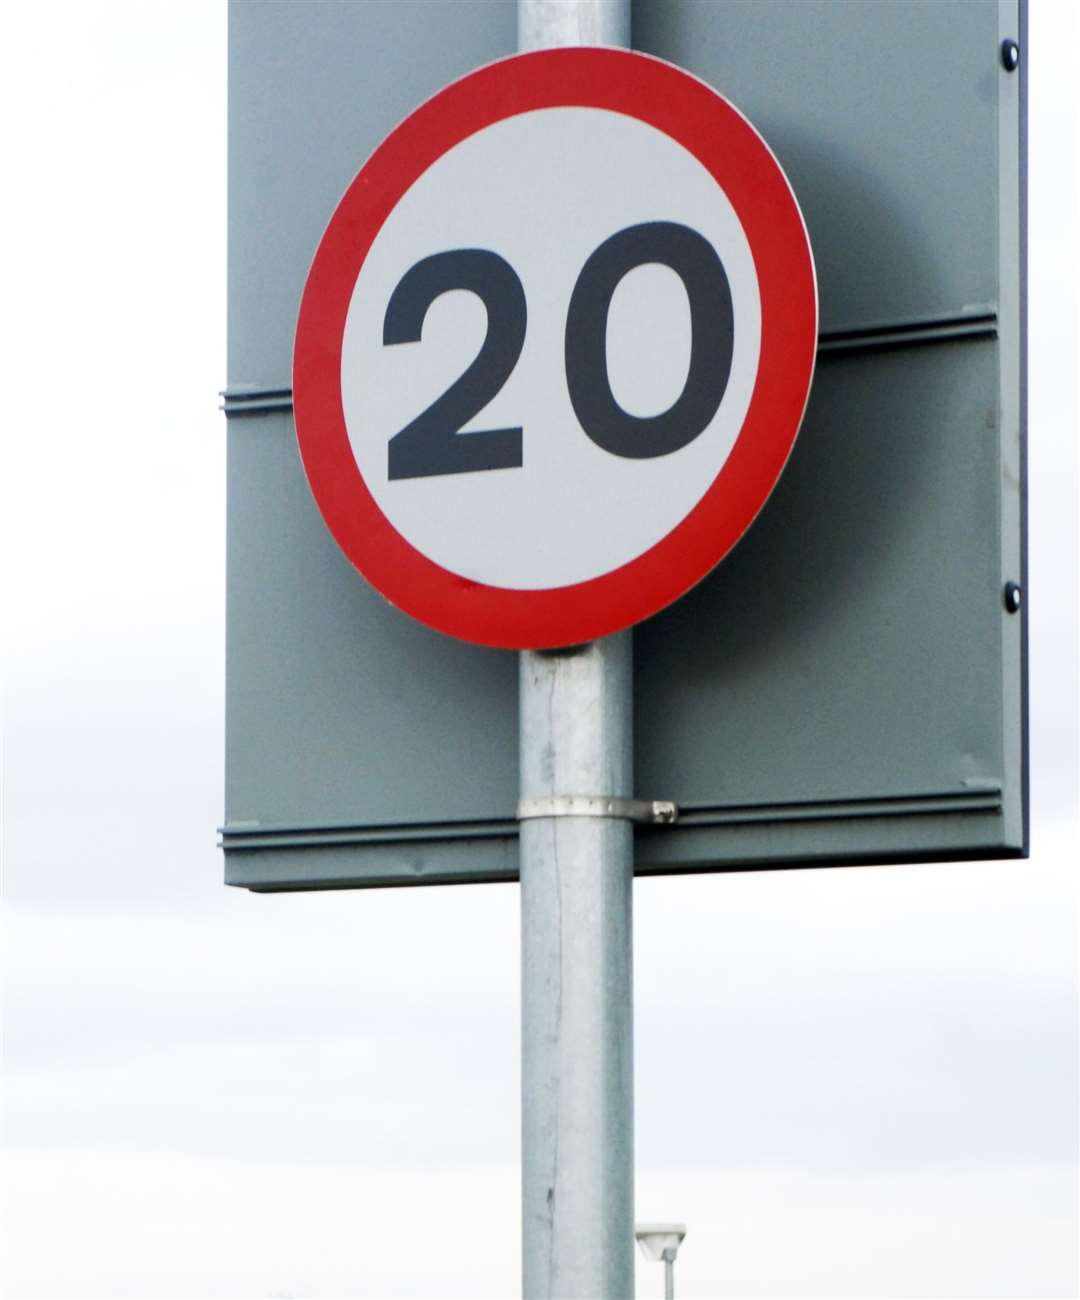 The proposed policy on speed limits particularly focuses on 20mph zones.